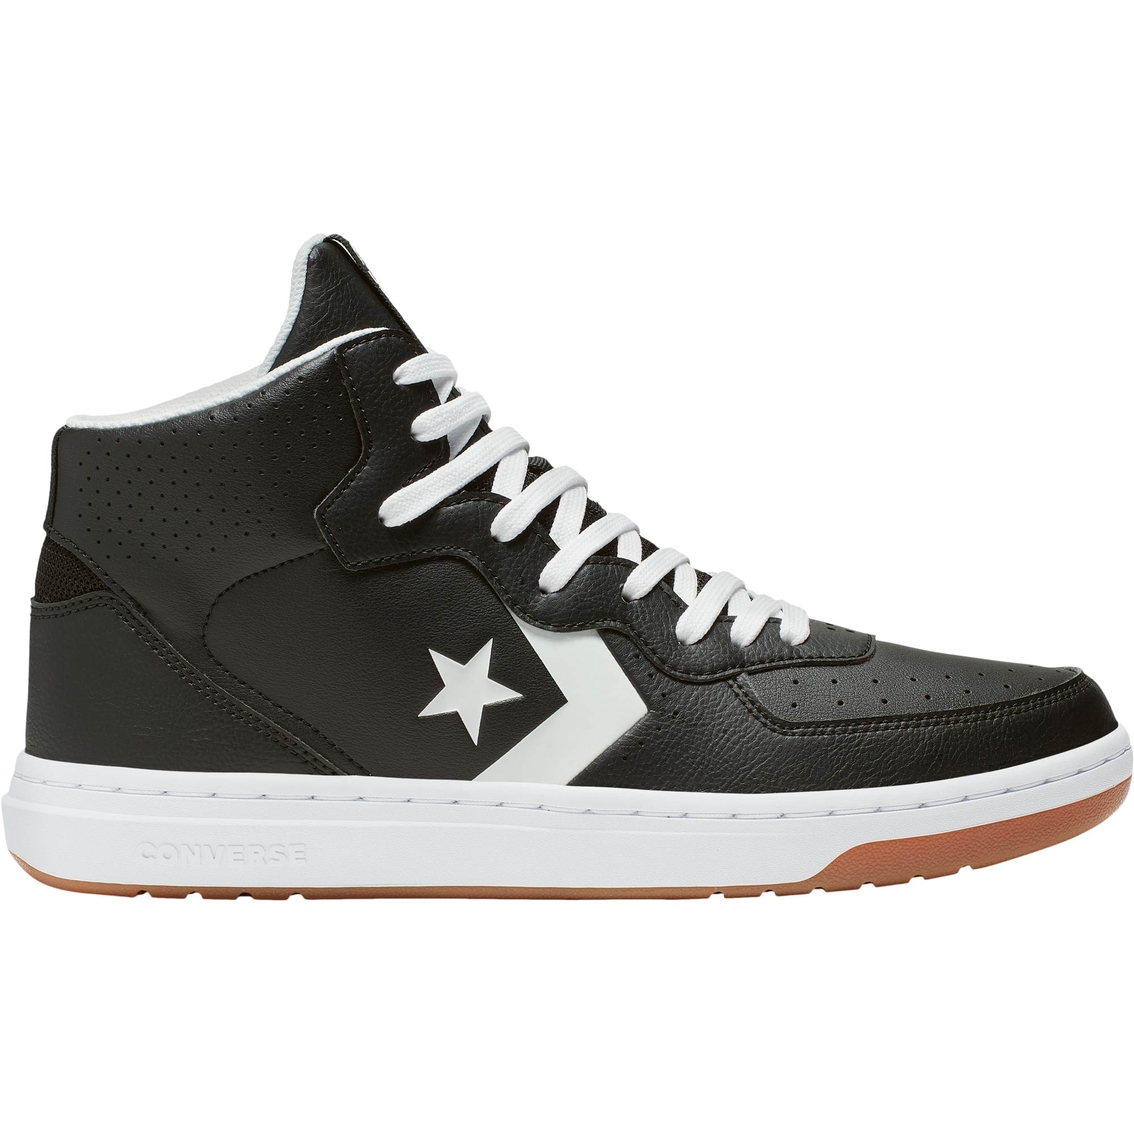 Converse Men's Rival Mid - Image 2 of 3